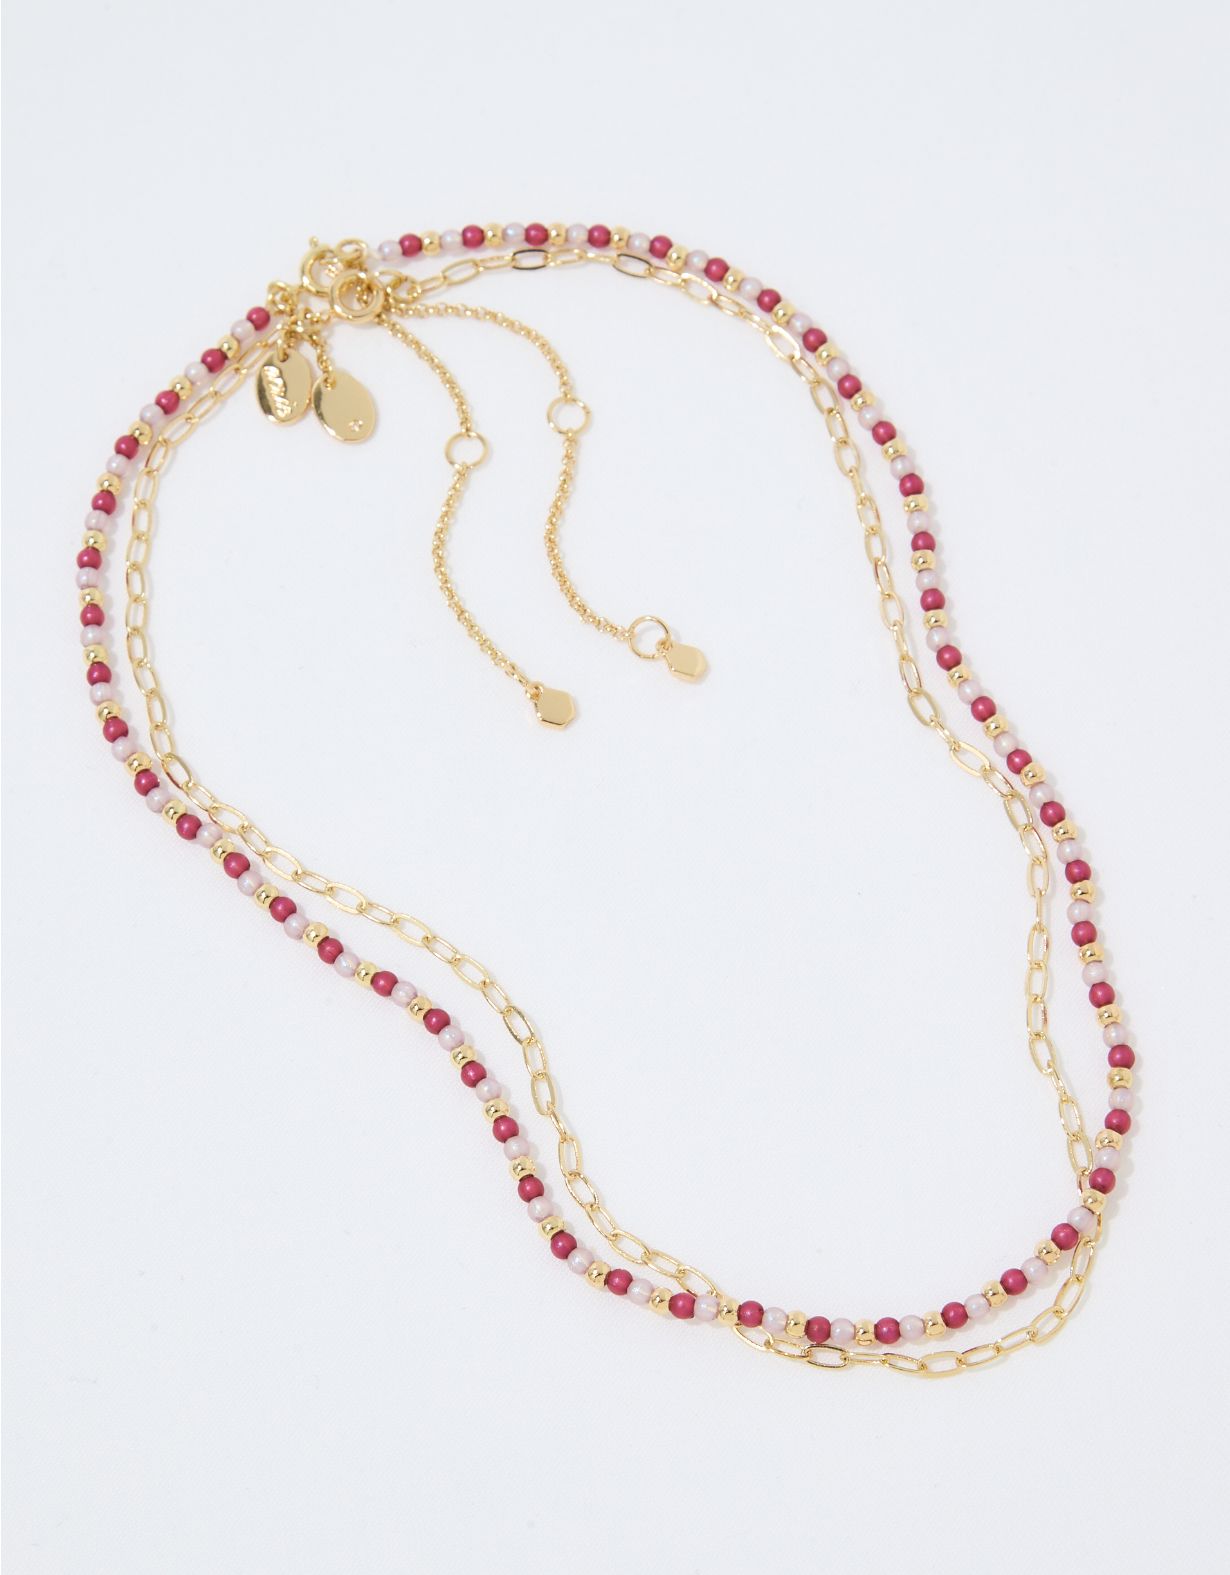 Aerie Iridescent Bead Necklace Pack